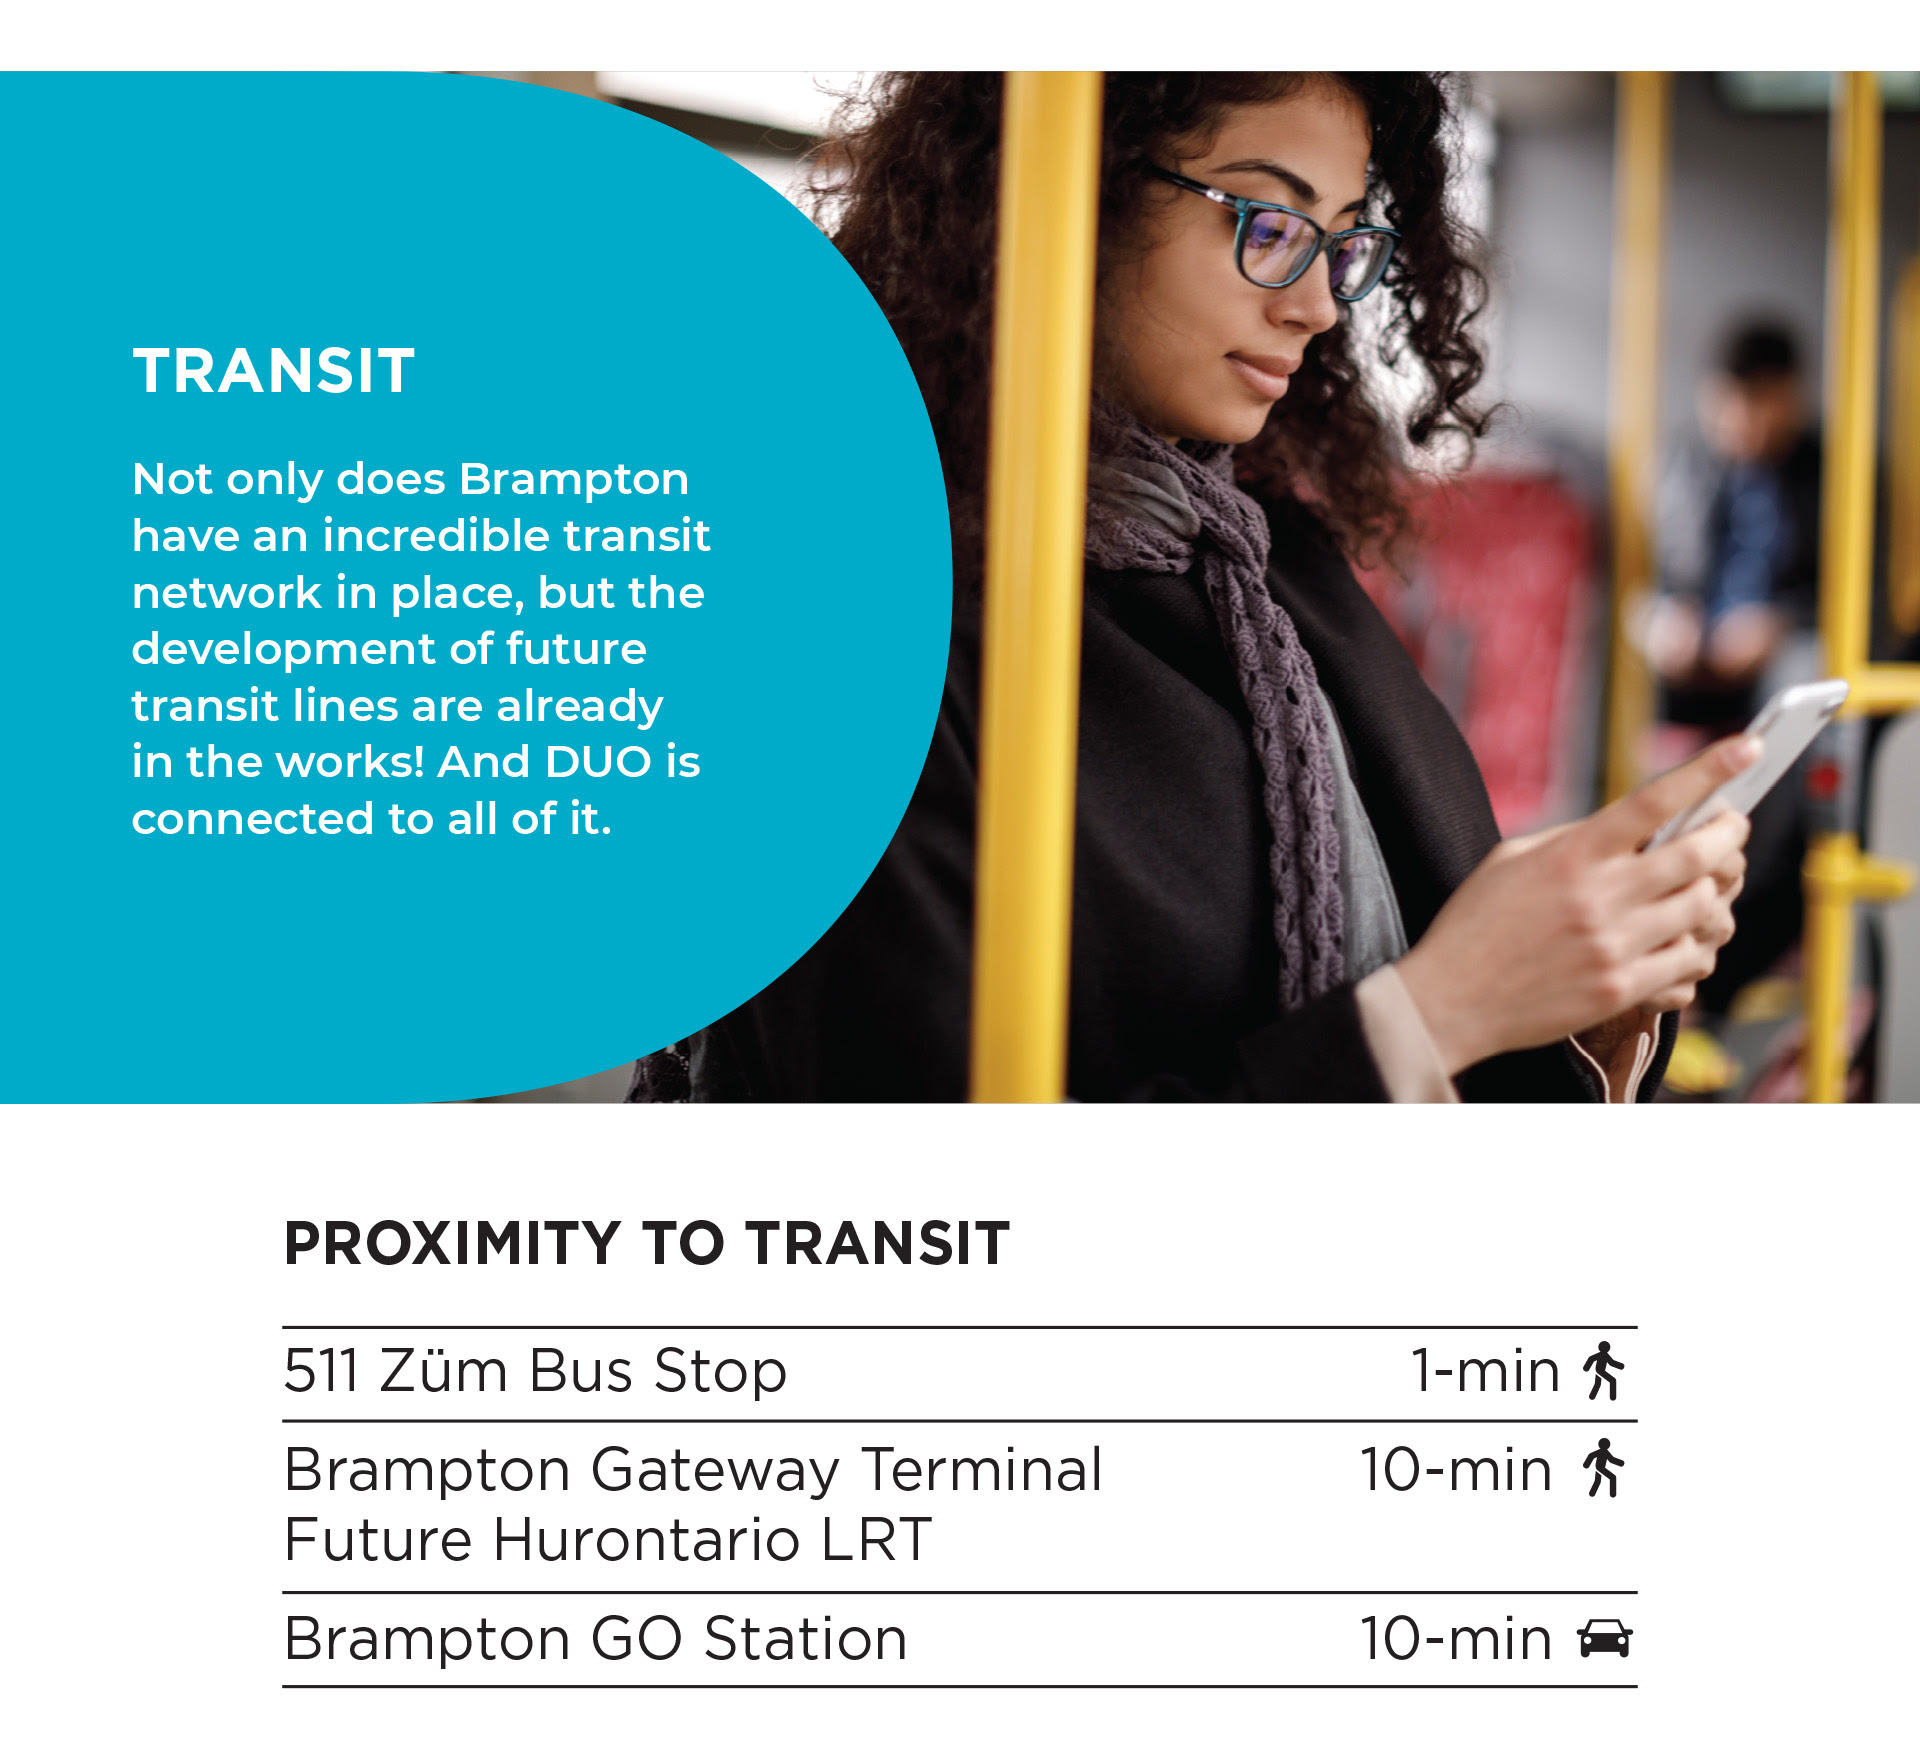  TRANSIT Not only does Brampton have an incredible transit network in place, but the development of future transit lines are already in the works! And DUO is connected to all of it. PROXIMITY TO TRANSIT 511 Züm Bus Stop - 1-min Brampton Gateway Terminal/Future Hurontario LRT - 10-min Brampton GO Station - 10-min